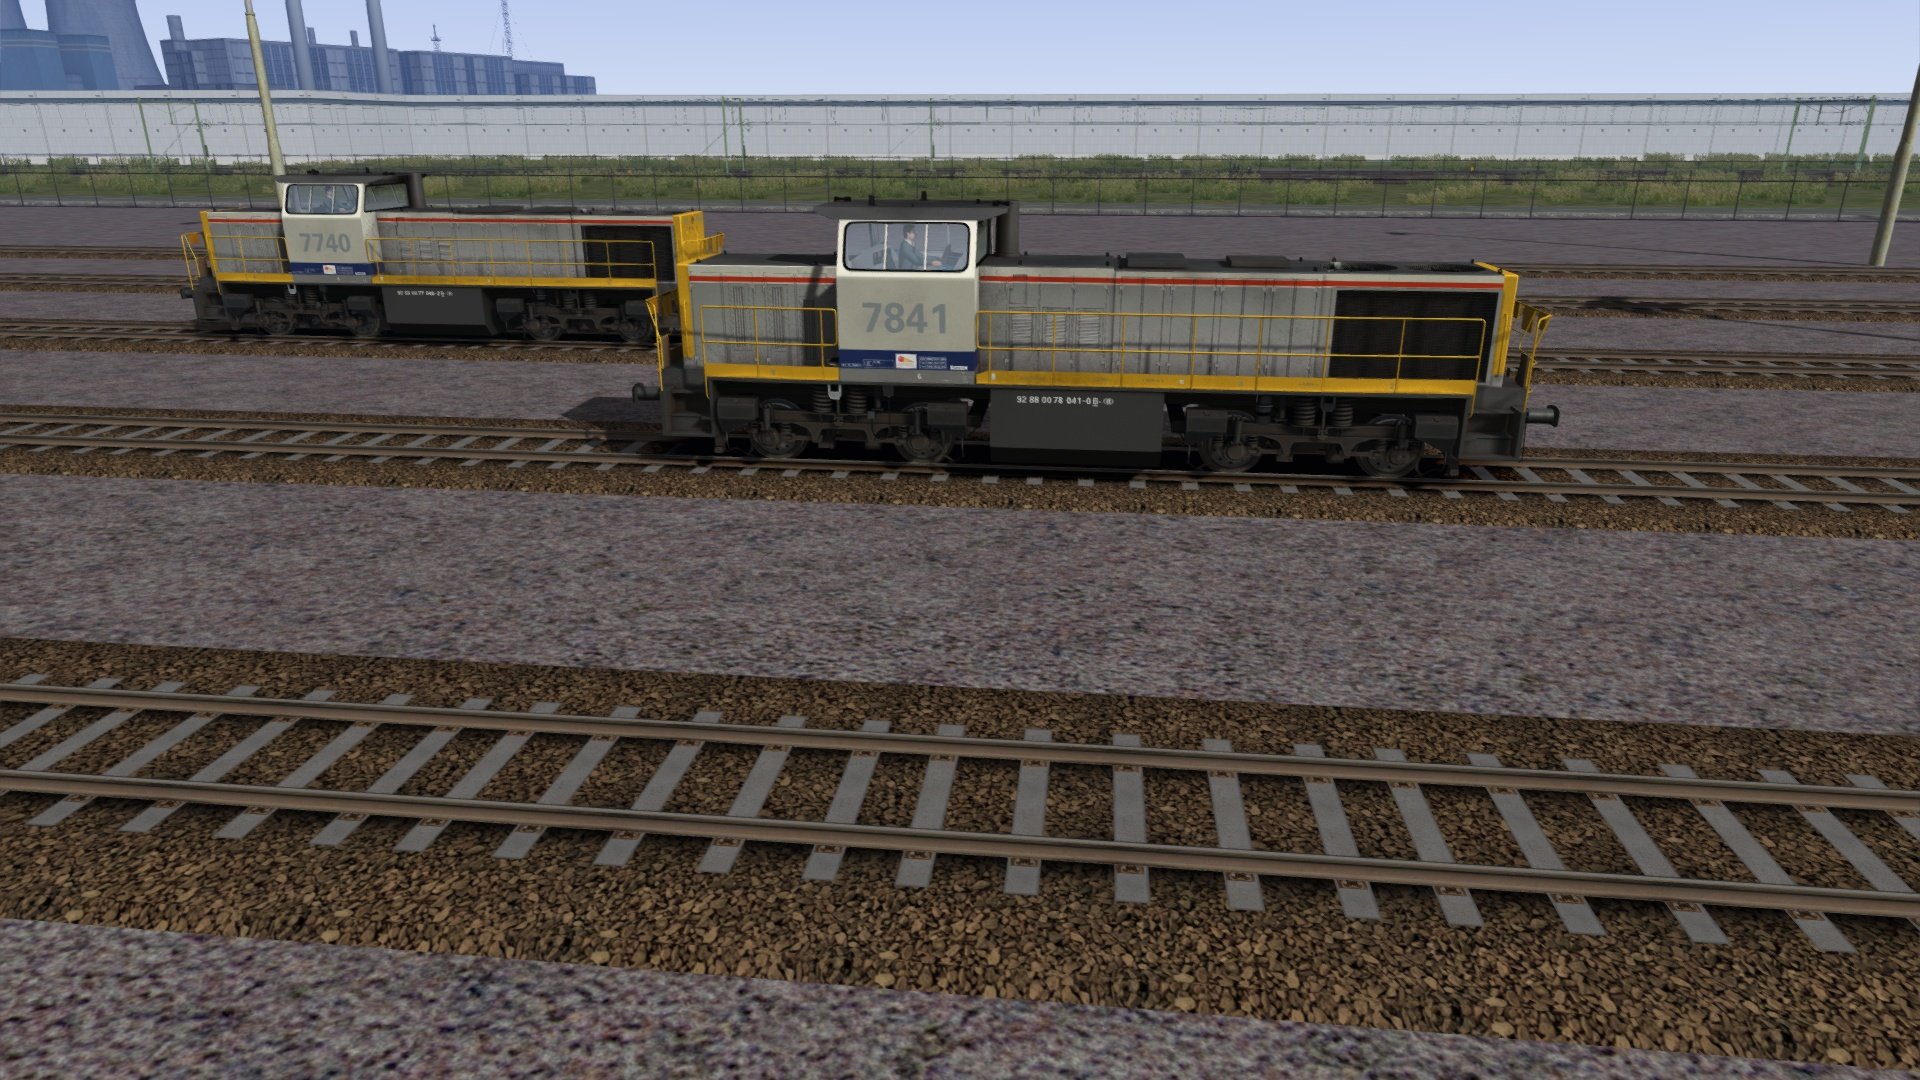 More information about "Update SNCB HLD77/78"